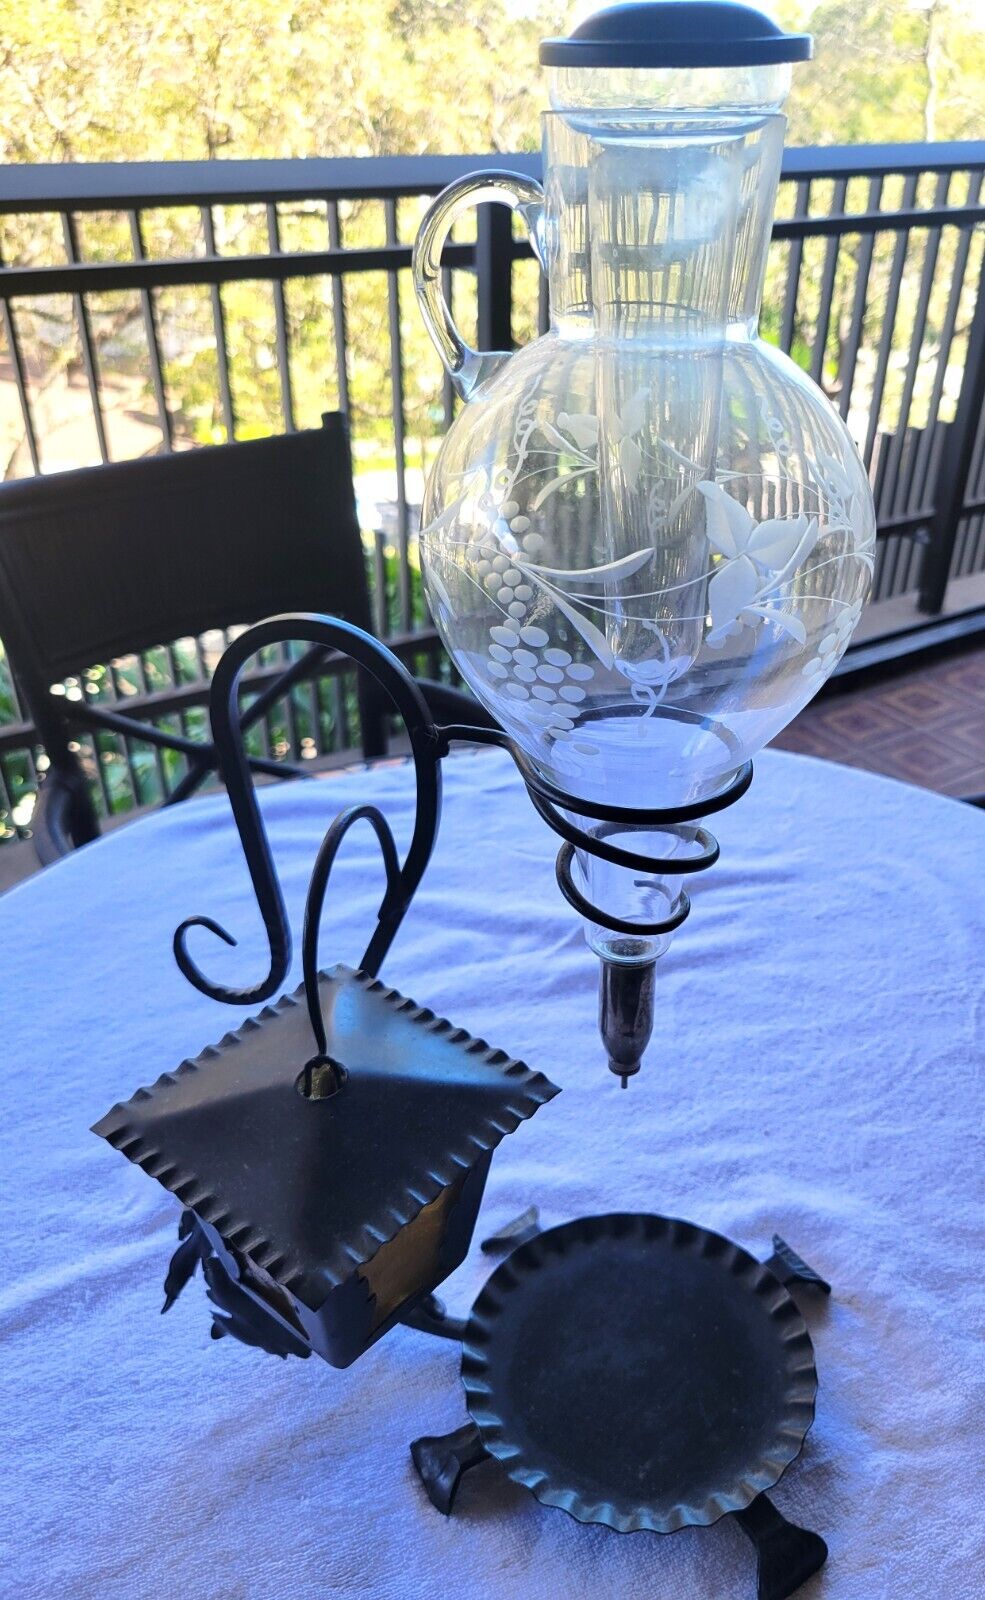 Unique antique German glass and wrought iron wine chiller and dispenser